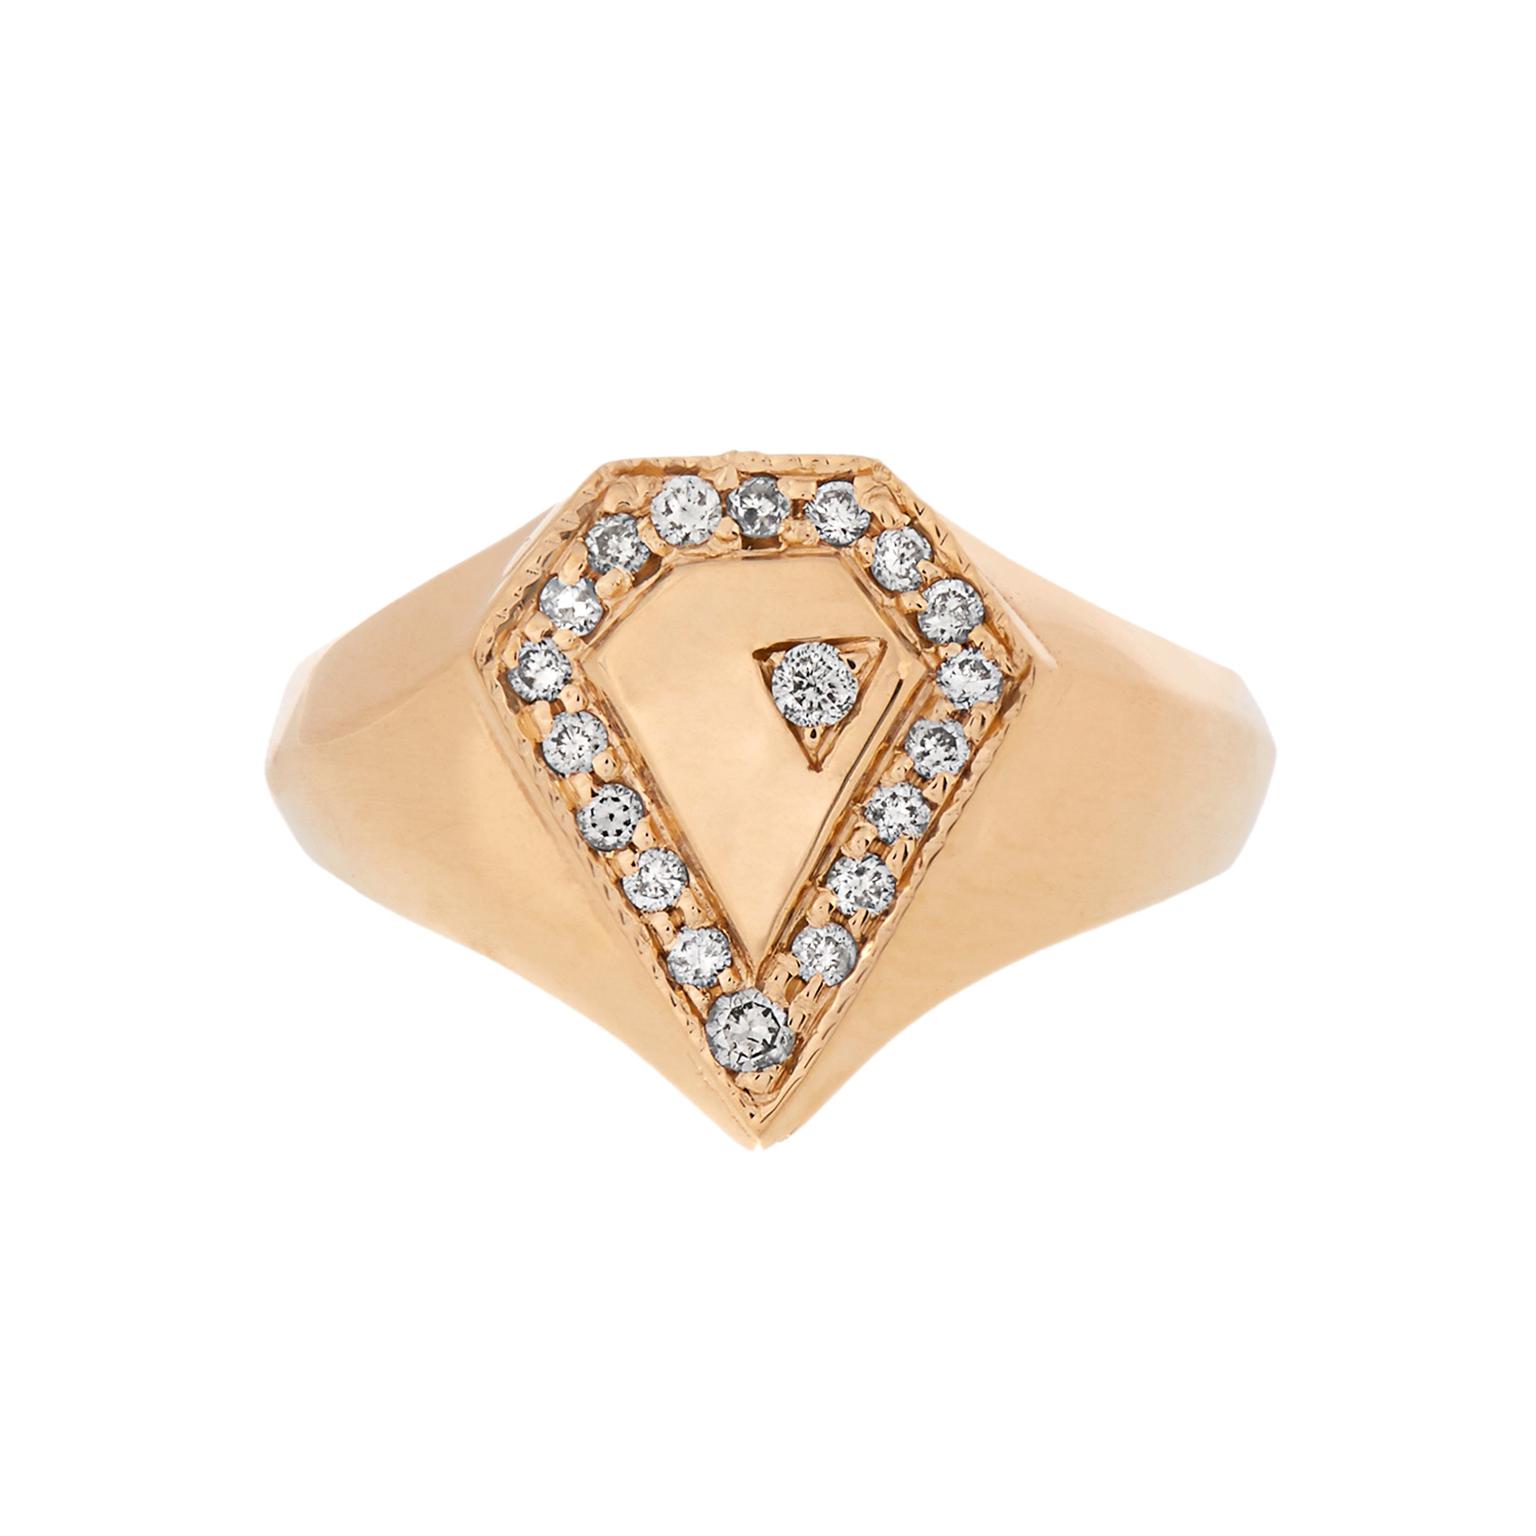 Gold and diamond signet ring | Jacquie Aiche | The Jewellery Editor